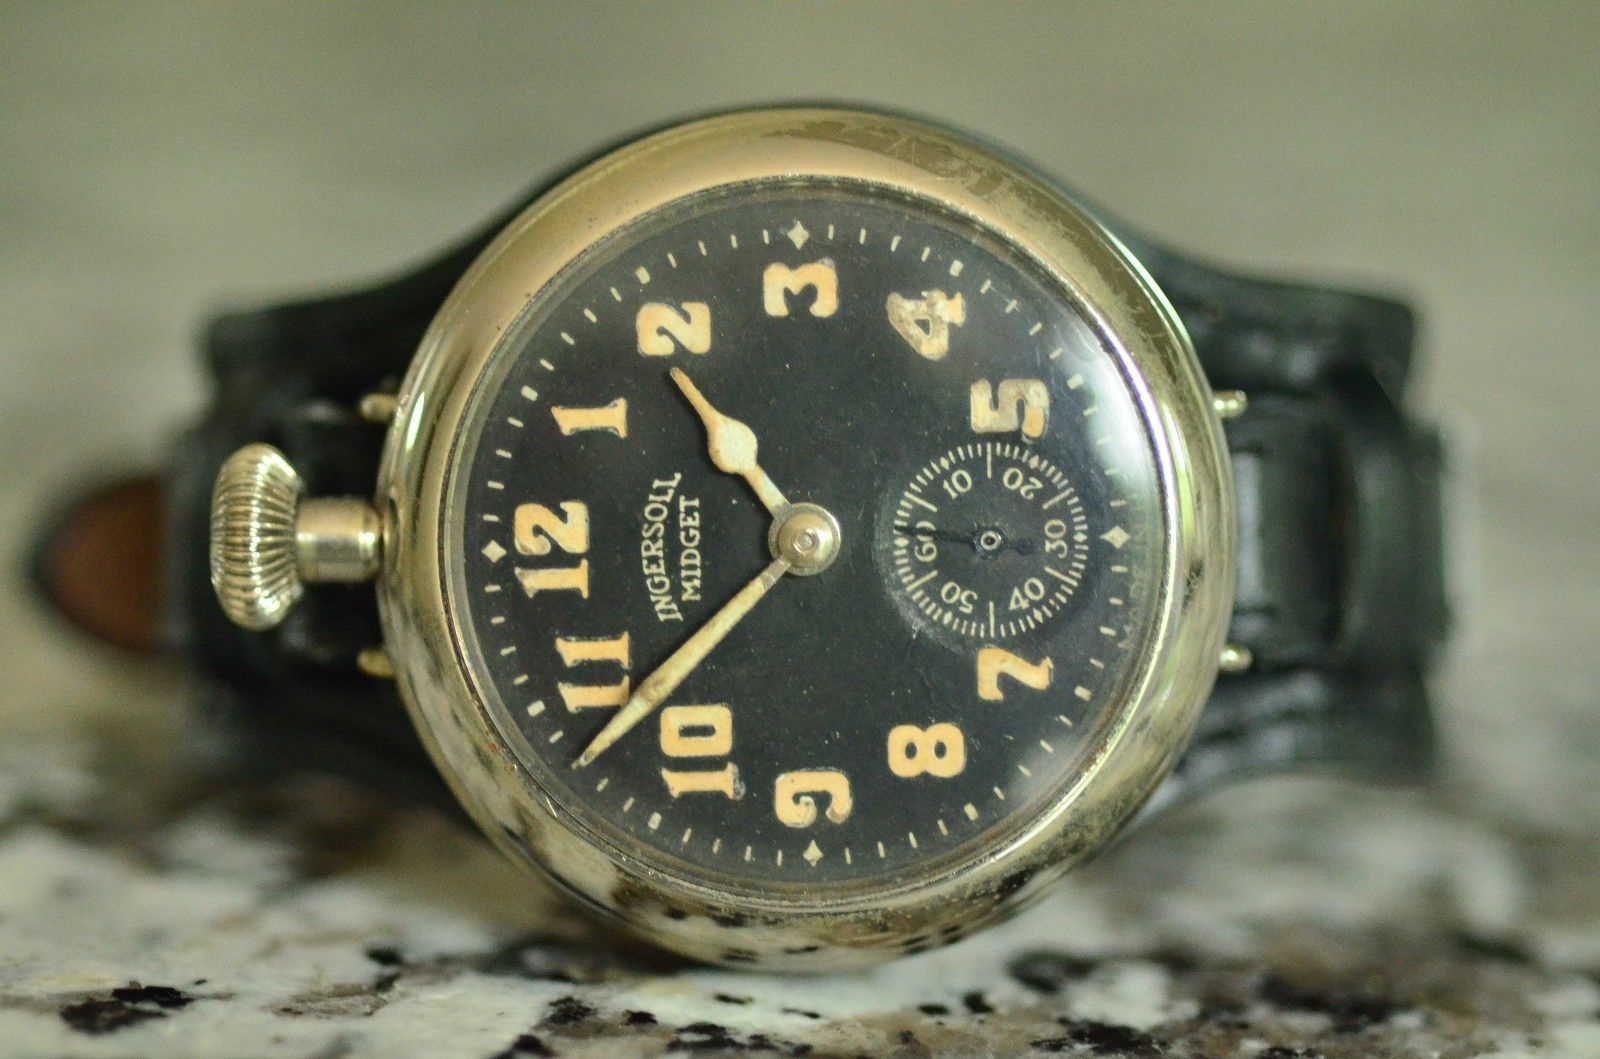 The Military Aesthetic: A History of Timex and the Sprite - Worn & Wound